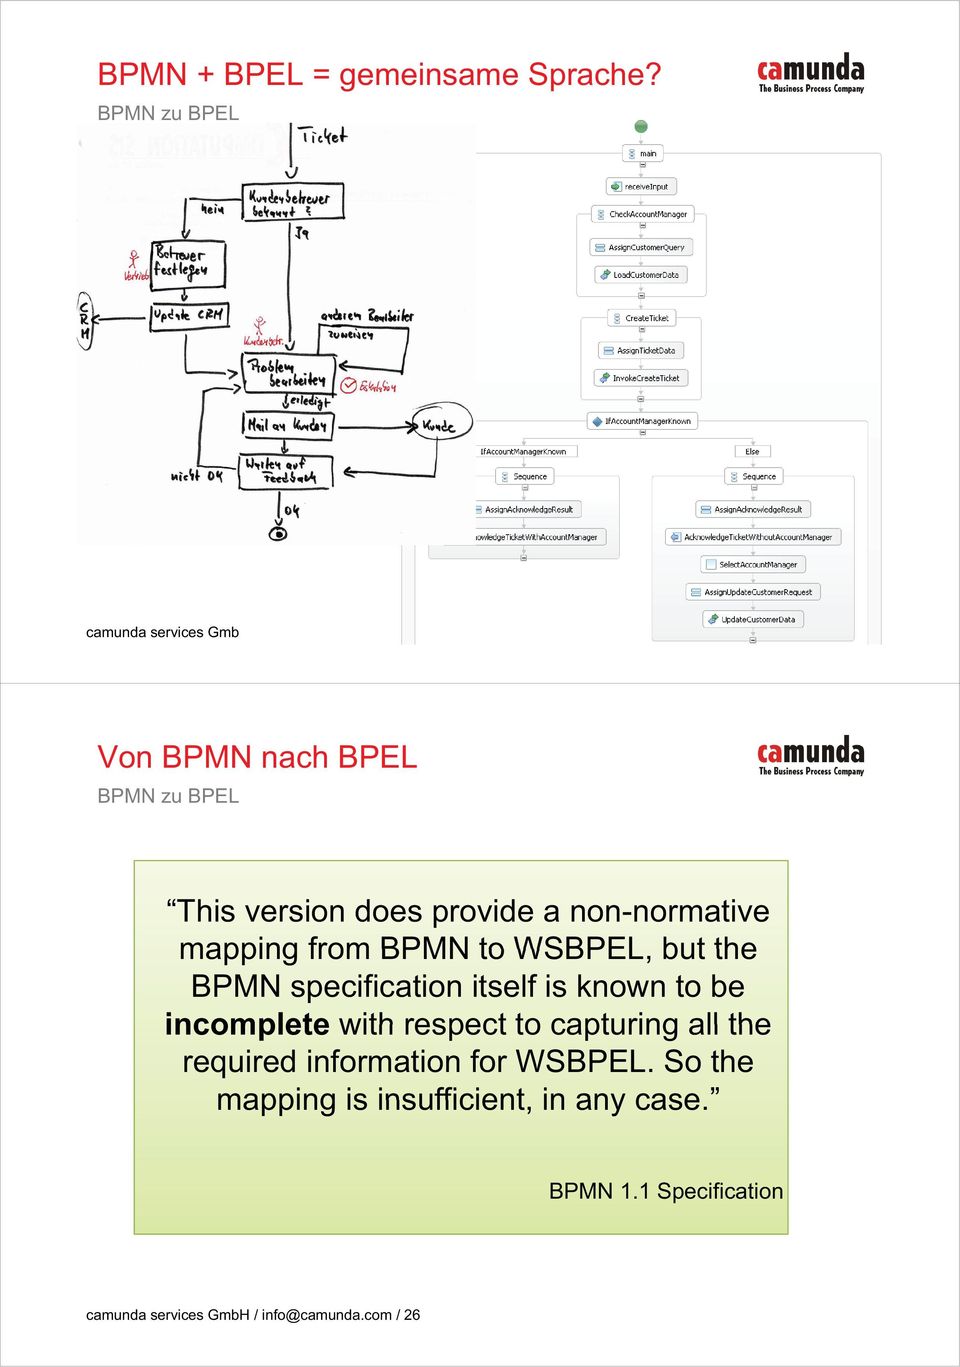 WSBPEL, but the BPMN specification itself is known to be incomplete with respect to capturing all the